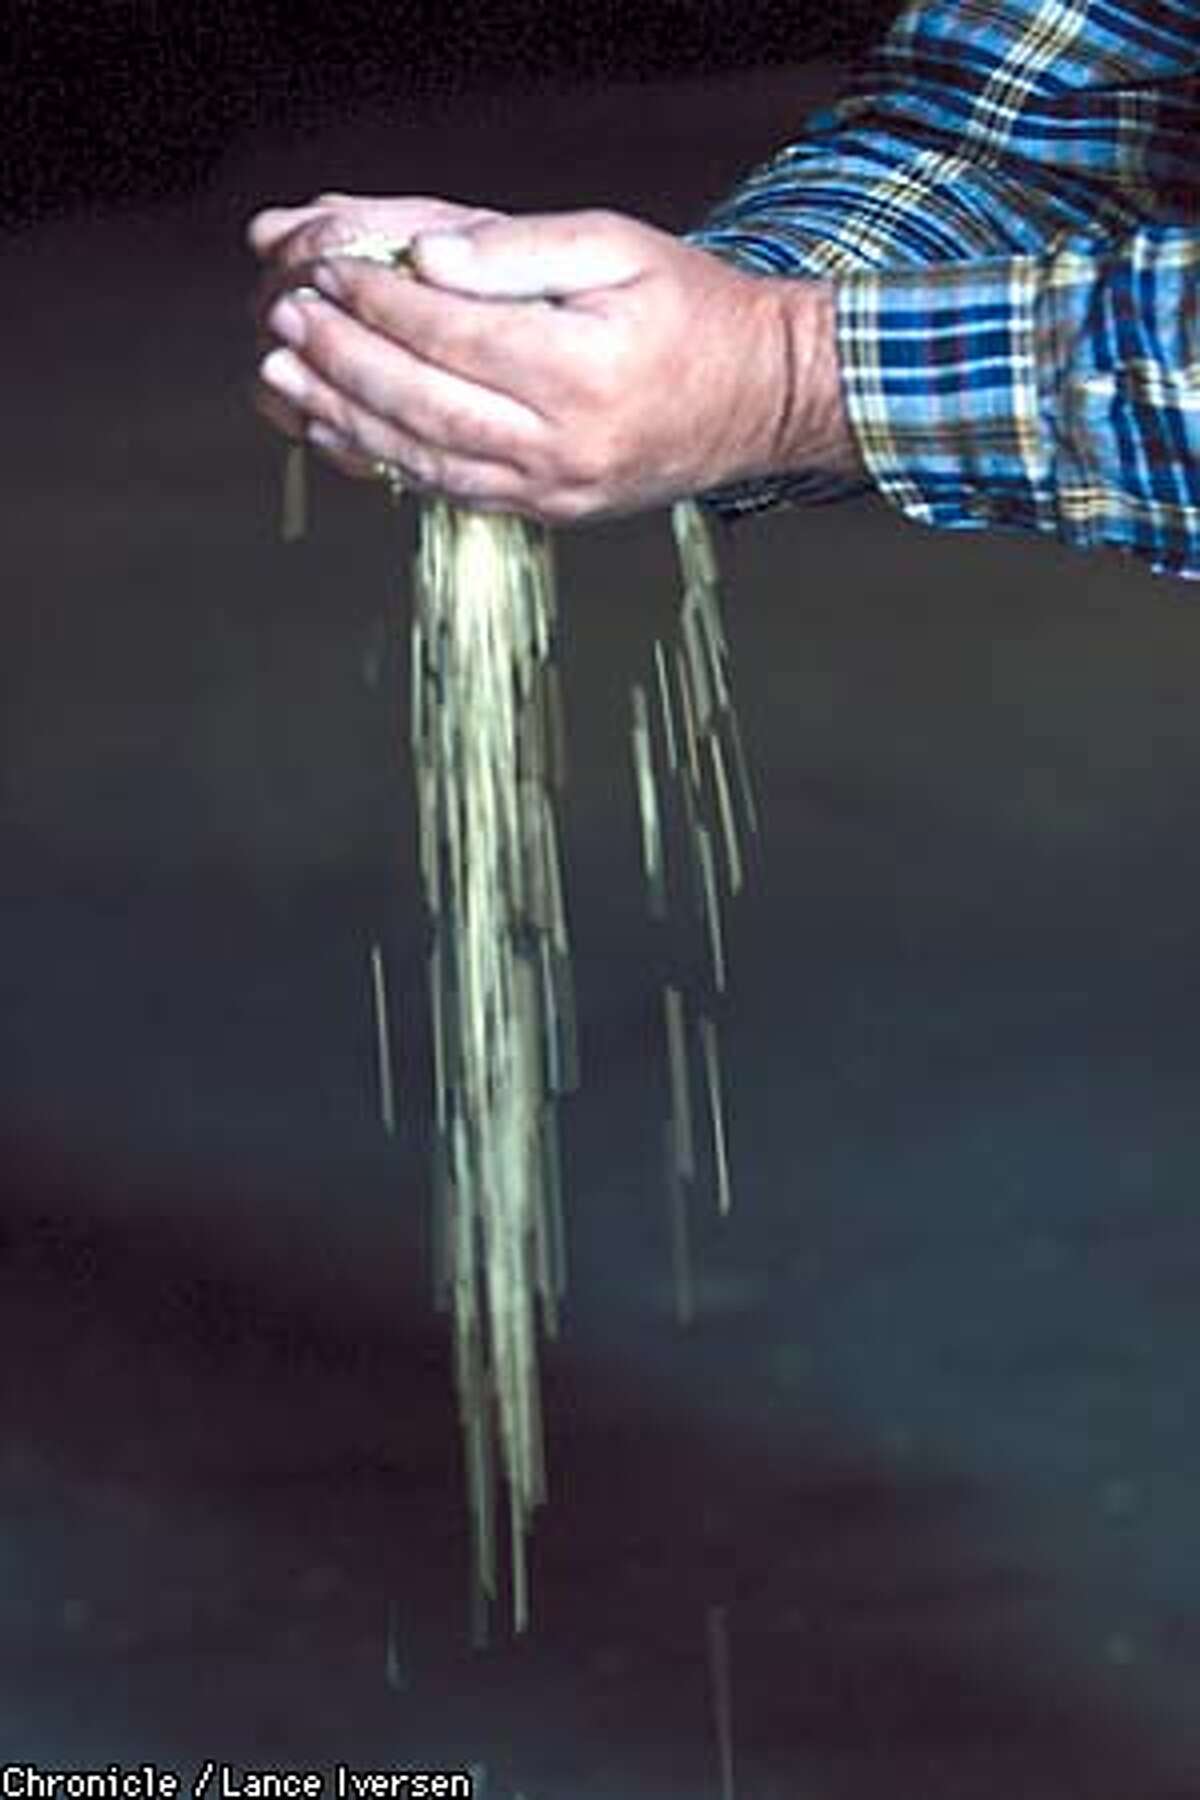 Brown rice flows from Ken Collins hands at his storage facility in Biggs Calif. Collins a rice grower and wholesaler who is involved in a novel project , converting rice straw into ethanol. By LANCE IVERSEN/SAN FRANCISCO CHRONICLE